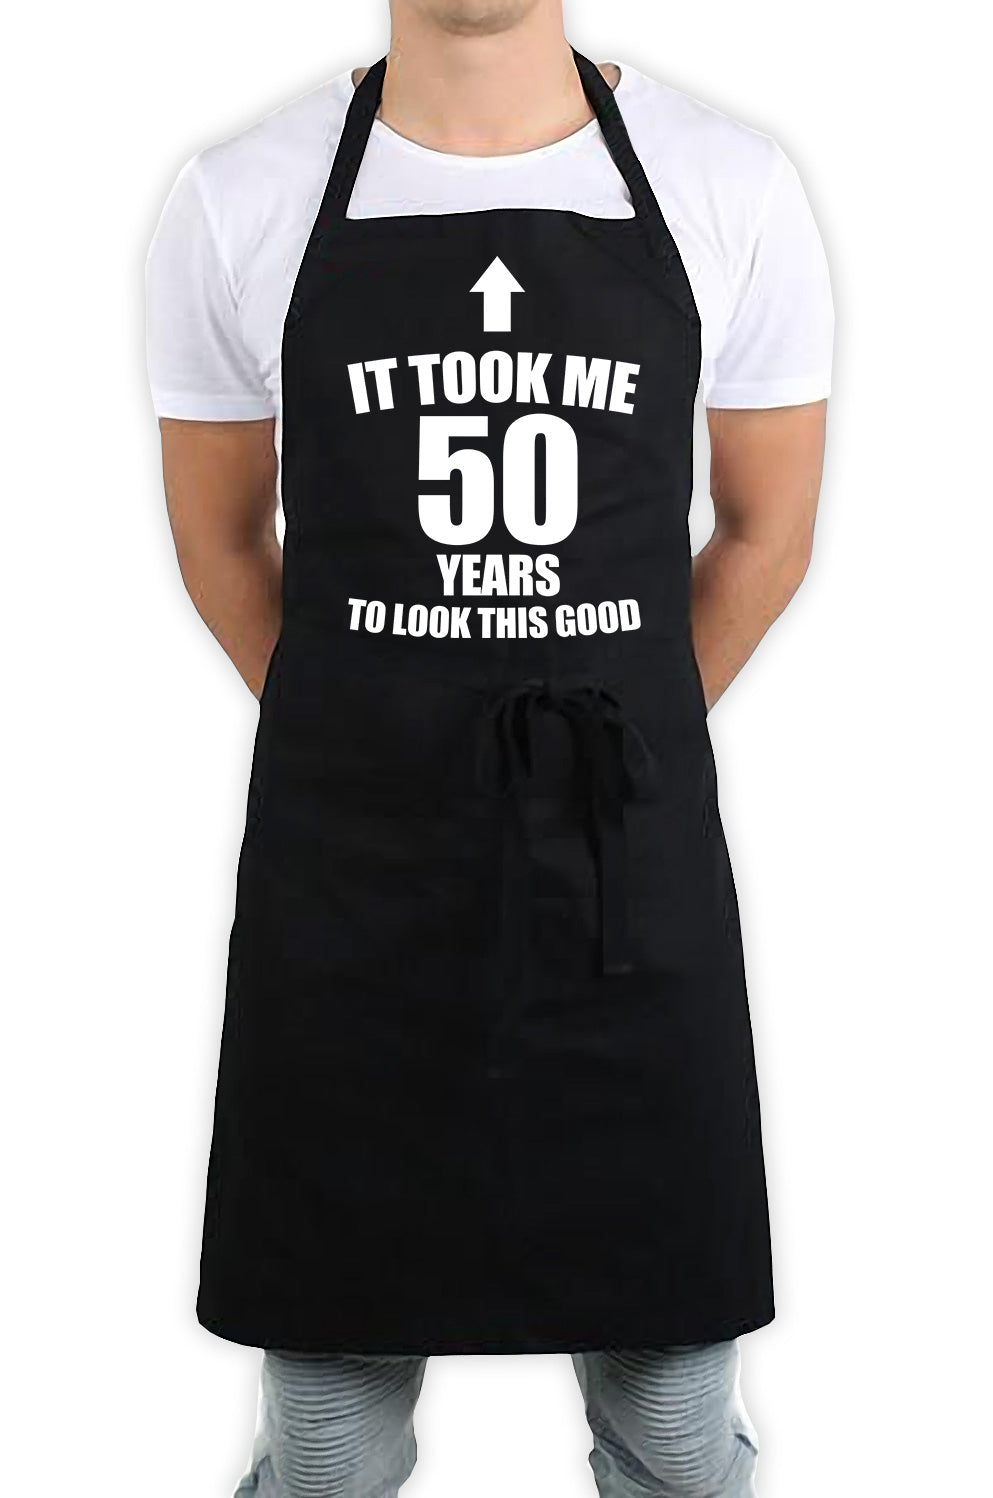 It Took Me 50 Years To Look This Good Funny Kitchen BBQ Apron Black